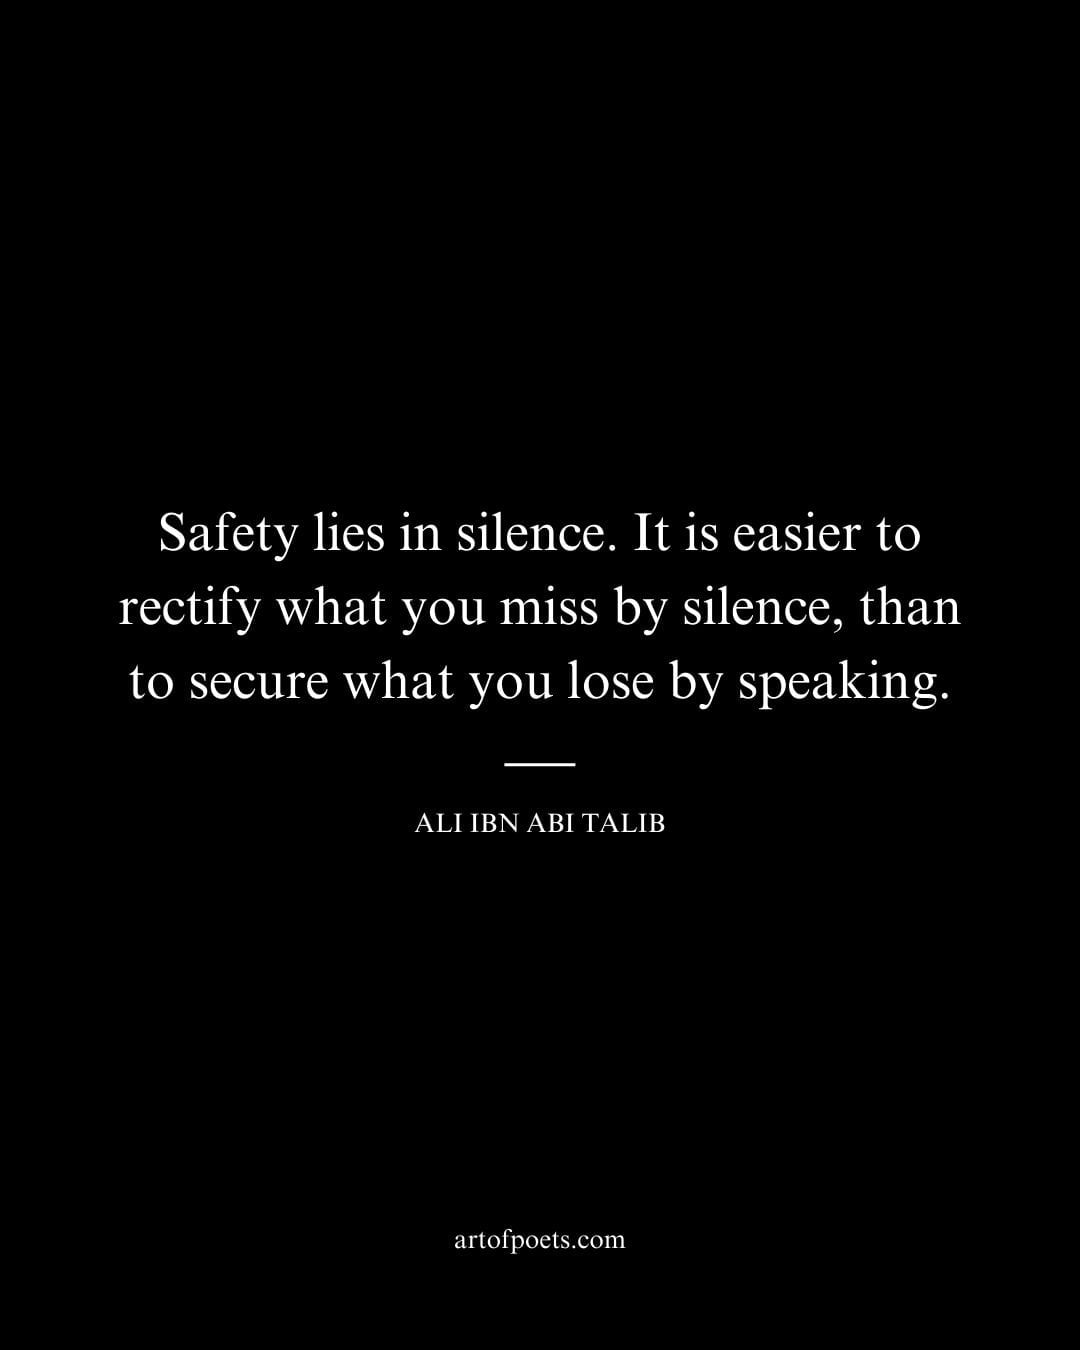 Safety lies in silence. It is easier to rectify what you miss by silence than to secure what you lose by speaking